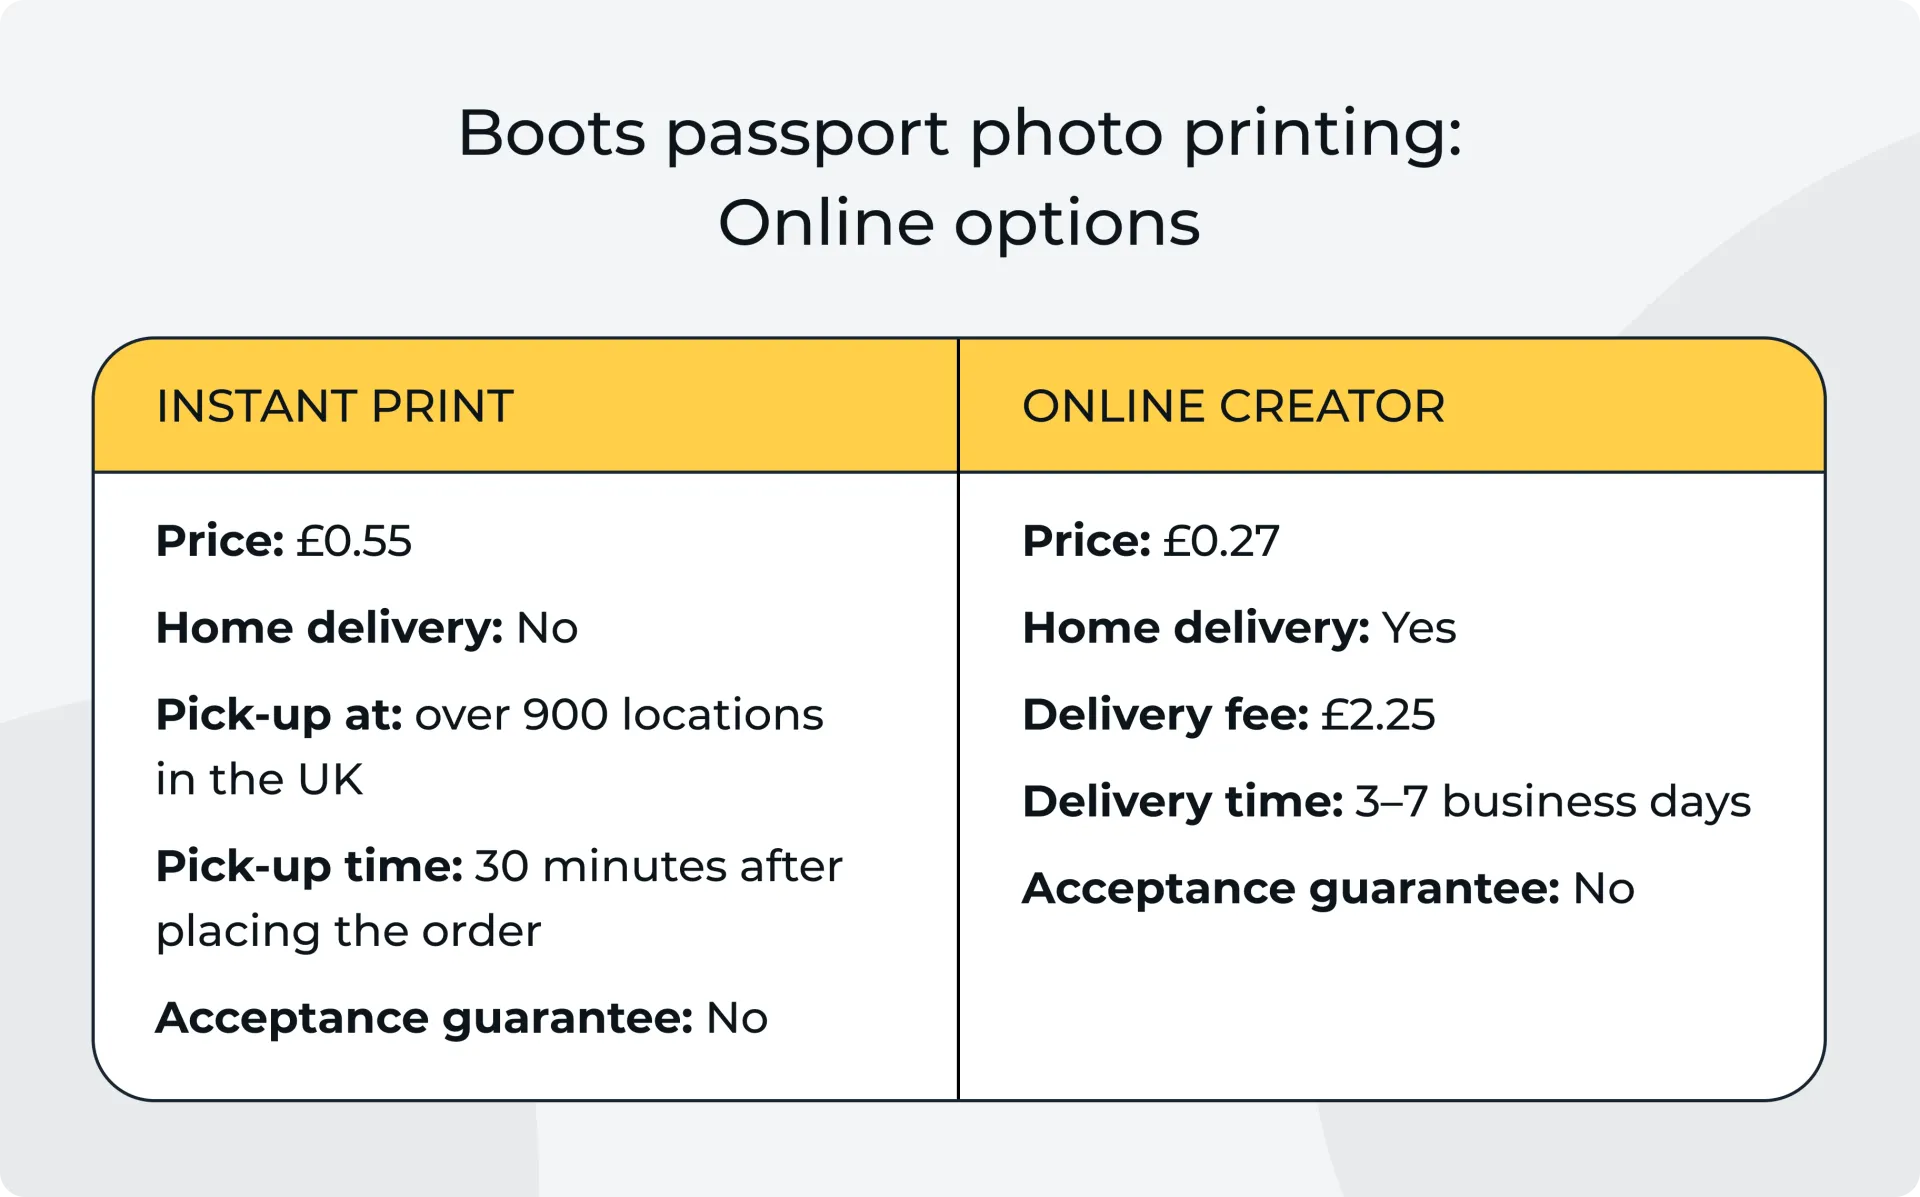 Comparison of Boots’ passport photo printing services available online.